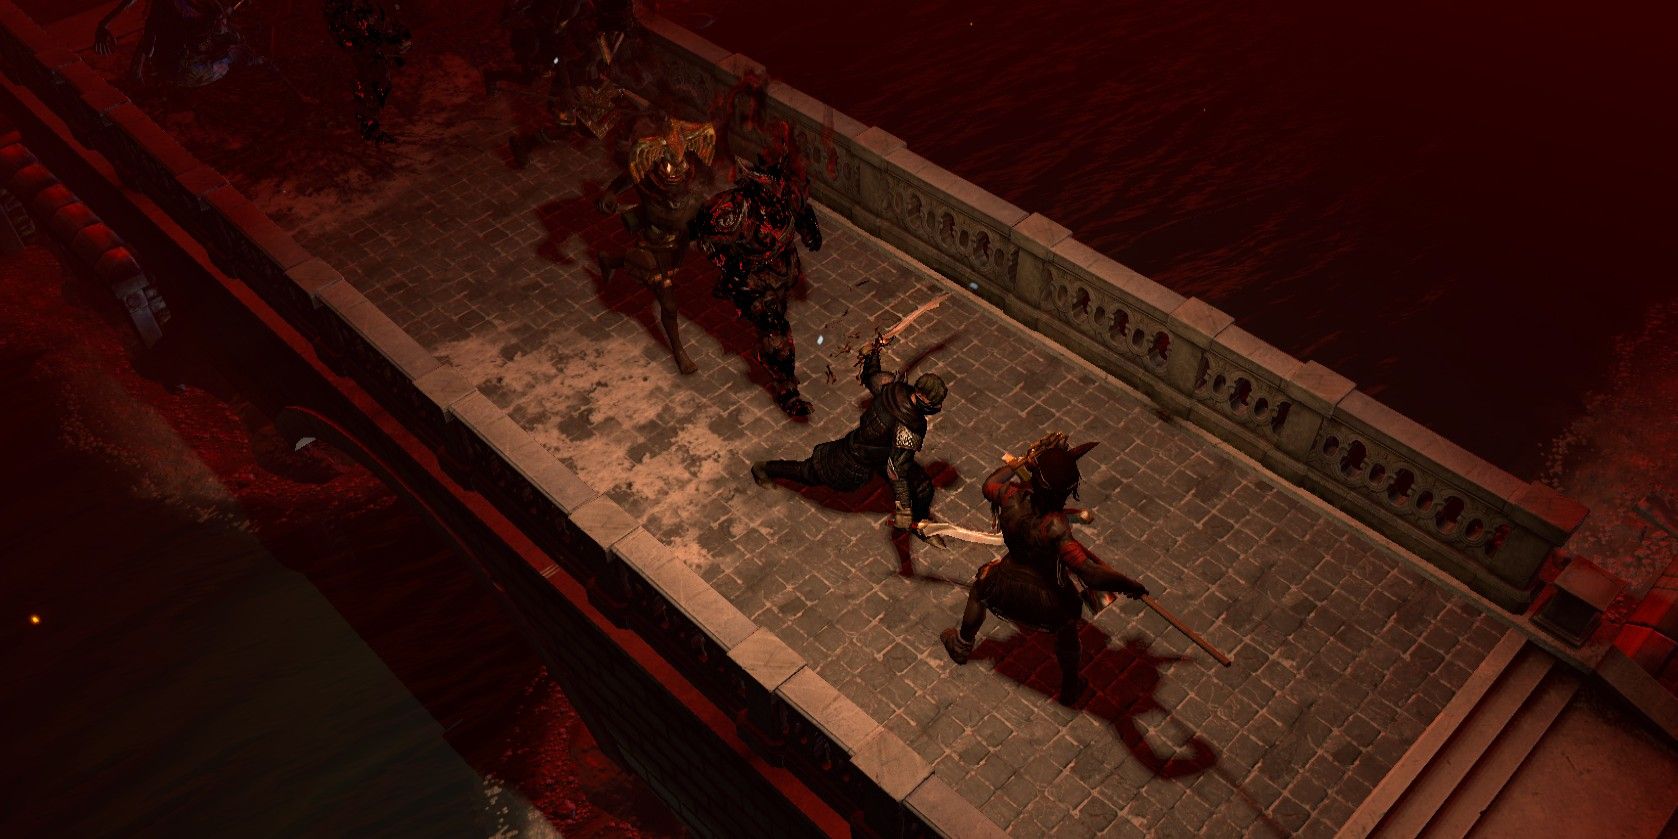 A screenshot shows gameplay in Path of Exile.